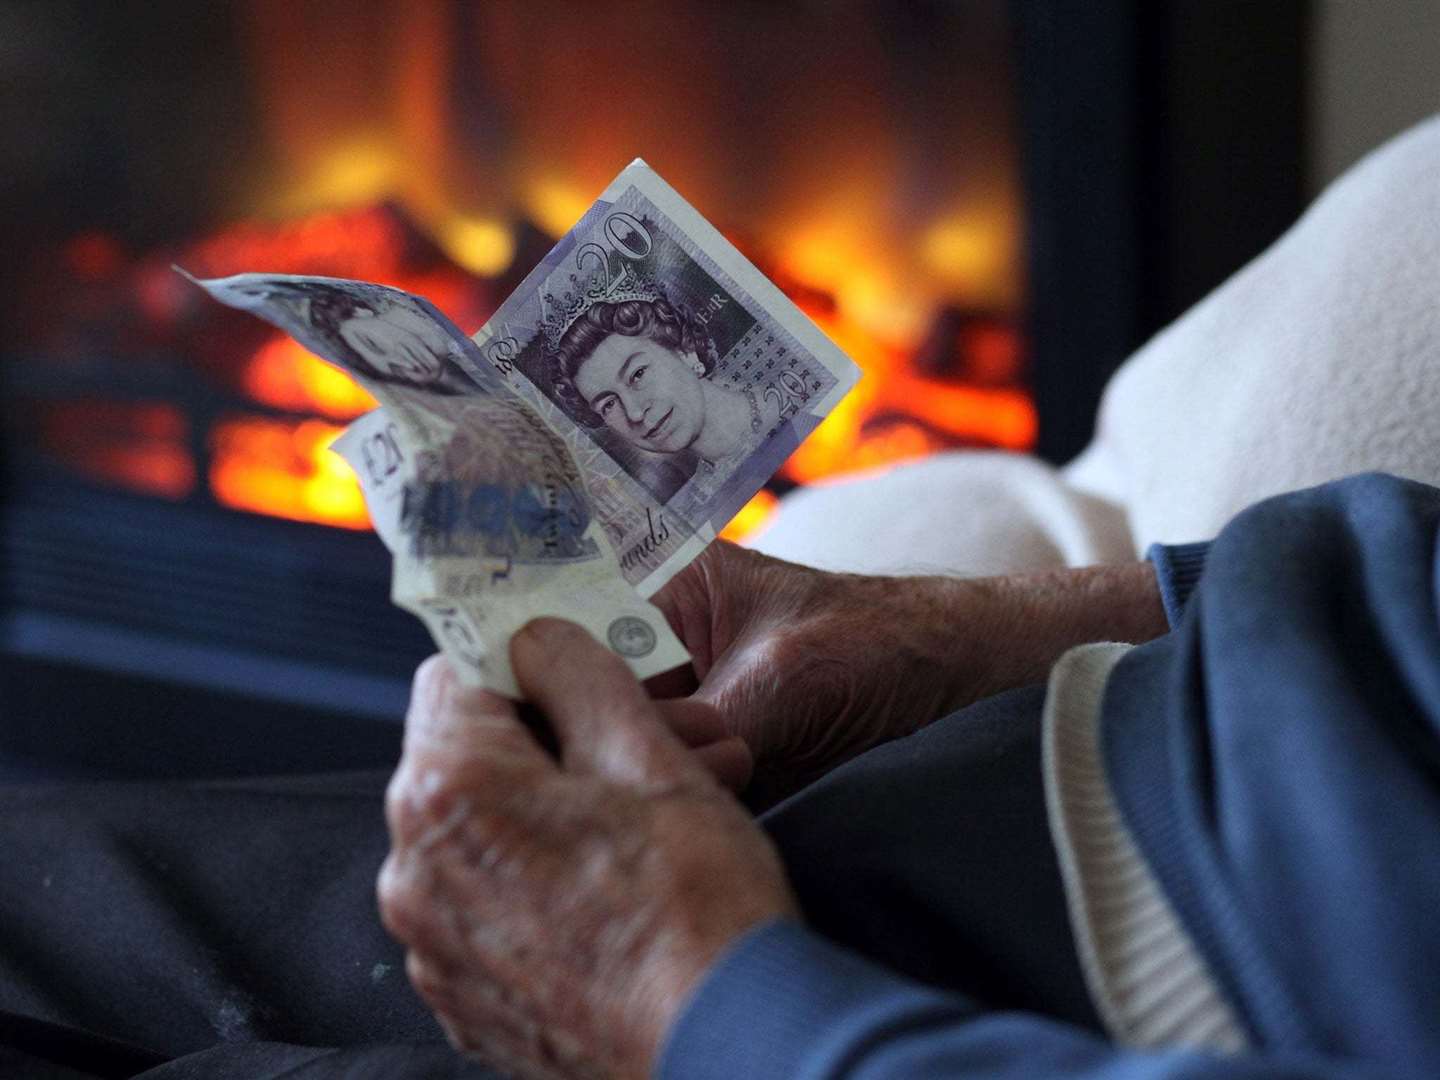 The proposed council tax rise could hit older people on state pensions hard.